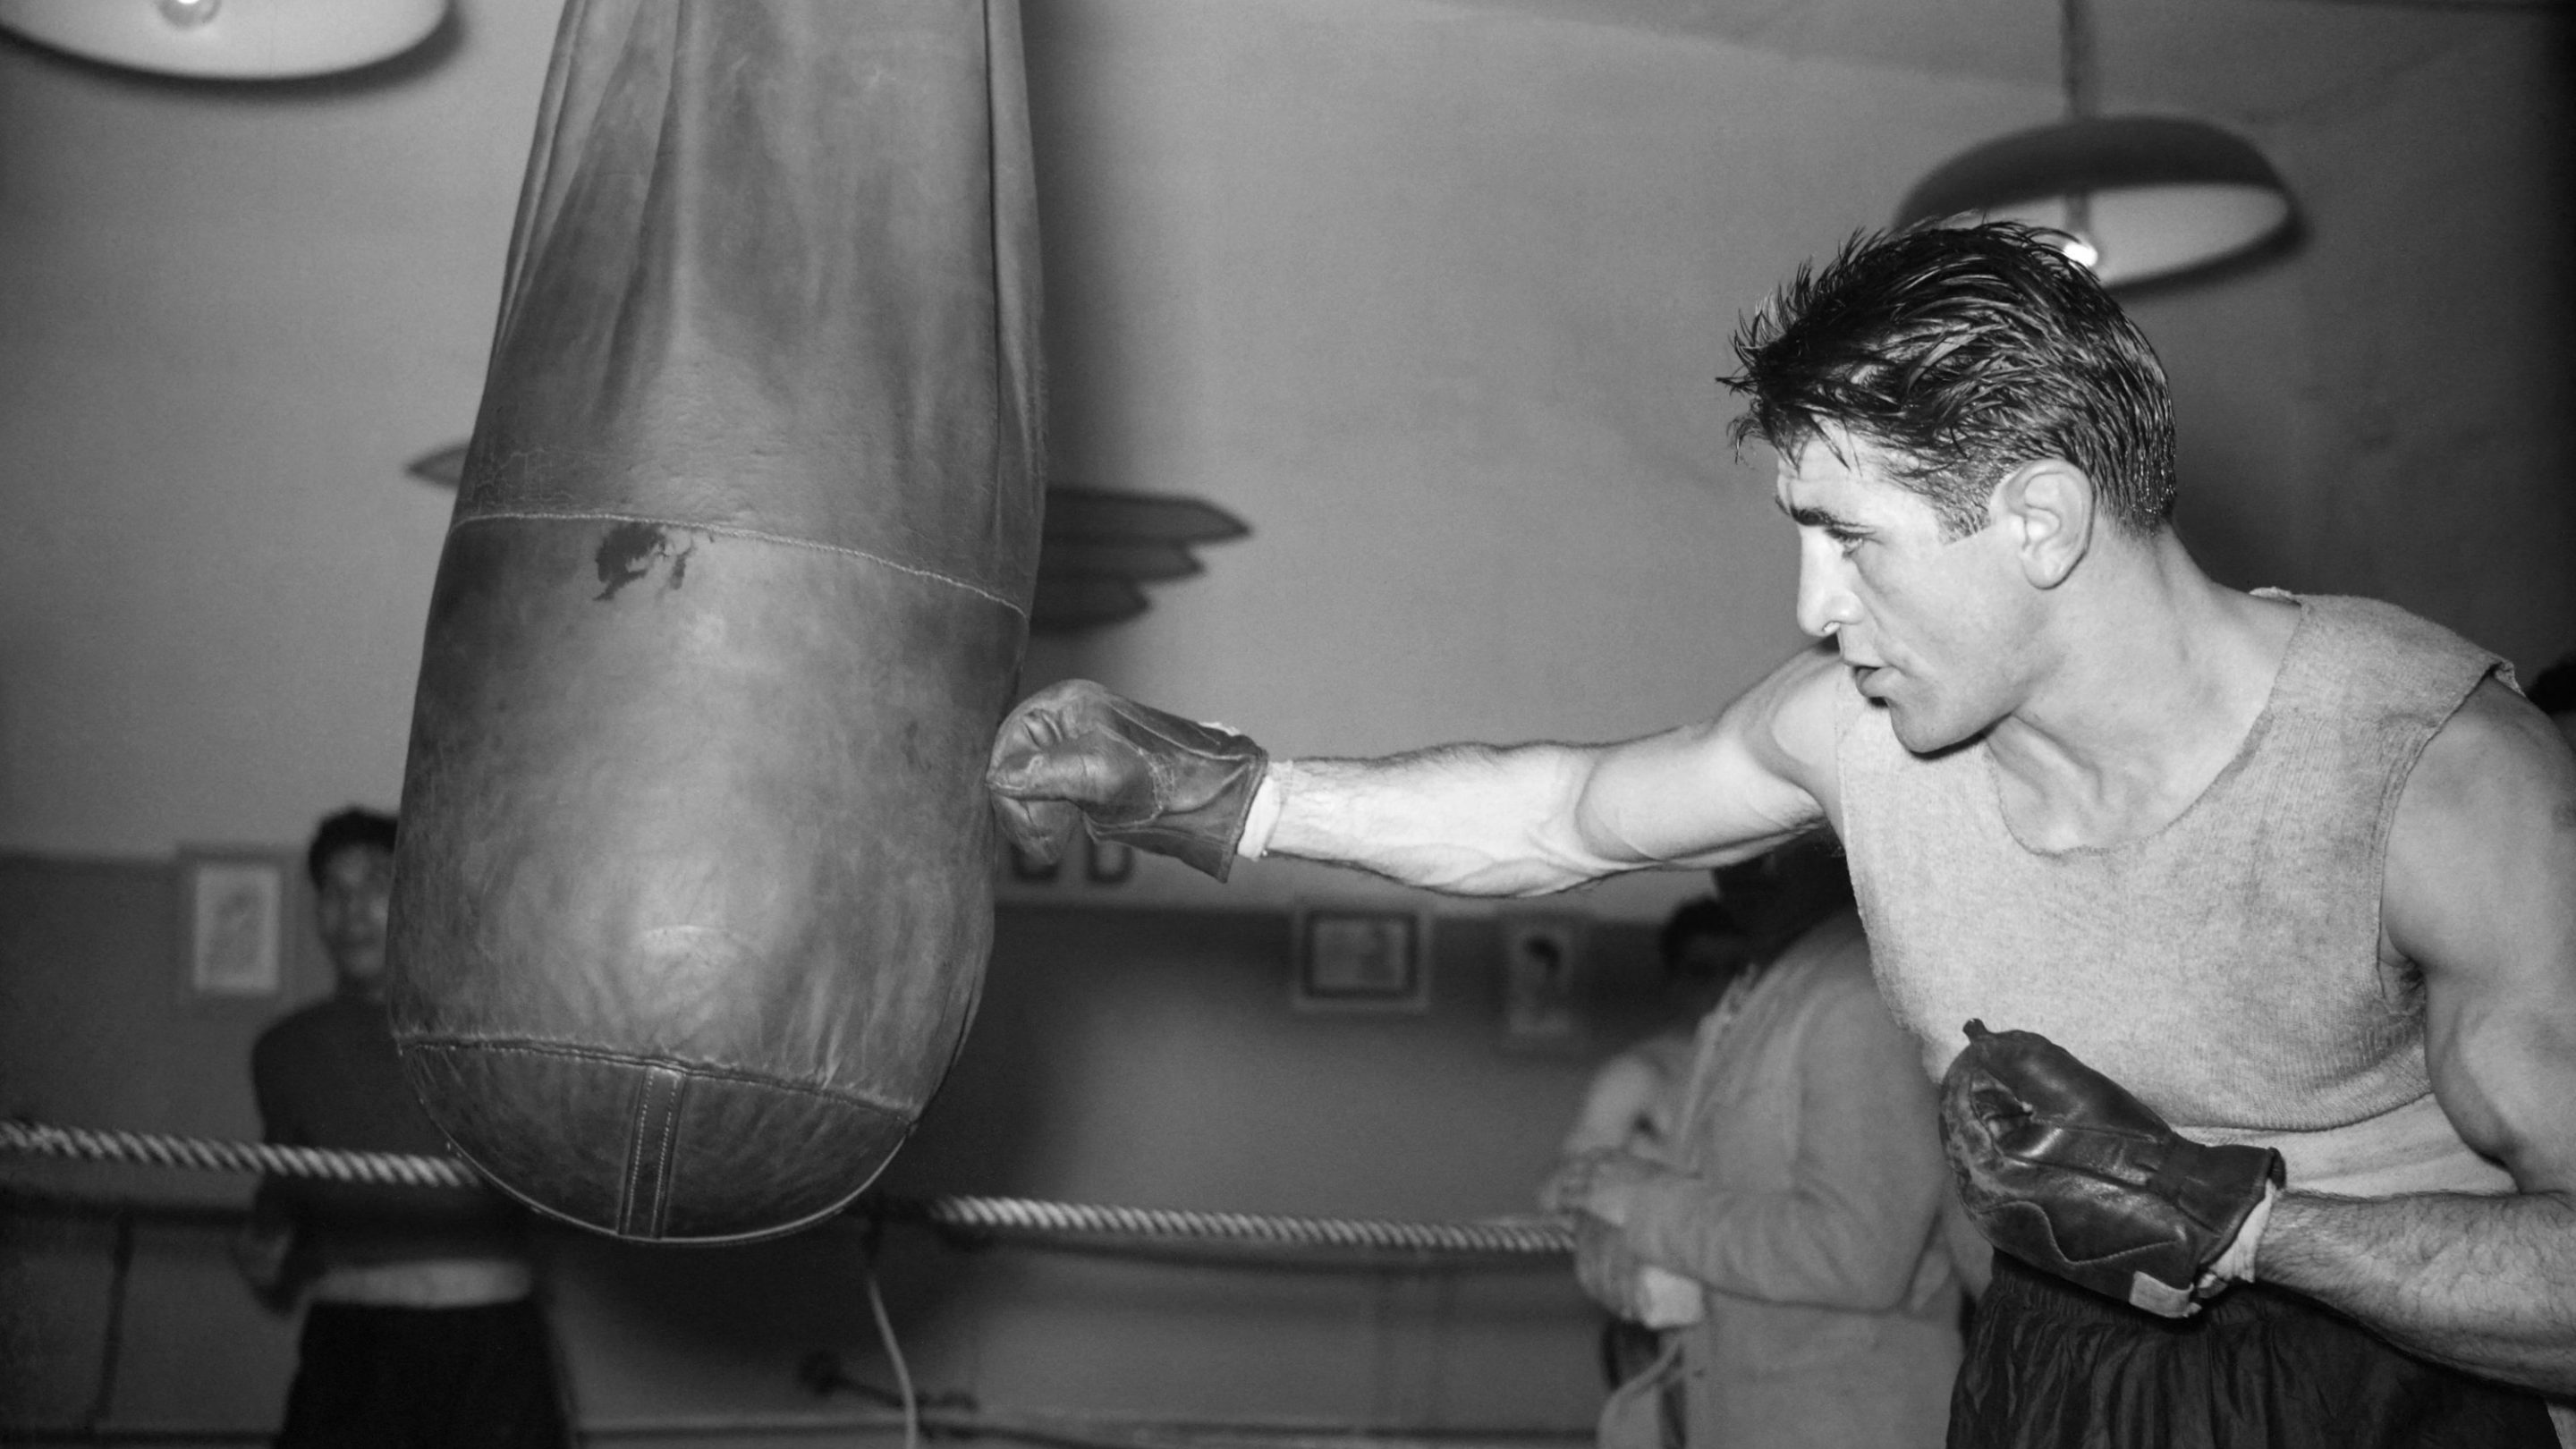 French boxer Laurent Dauthuille trains on October 27, 1946 at the Palais sed Sports in Paris before his match against Robert Charron.